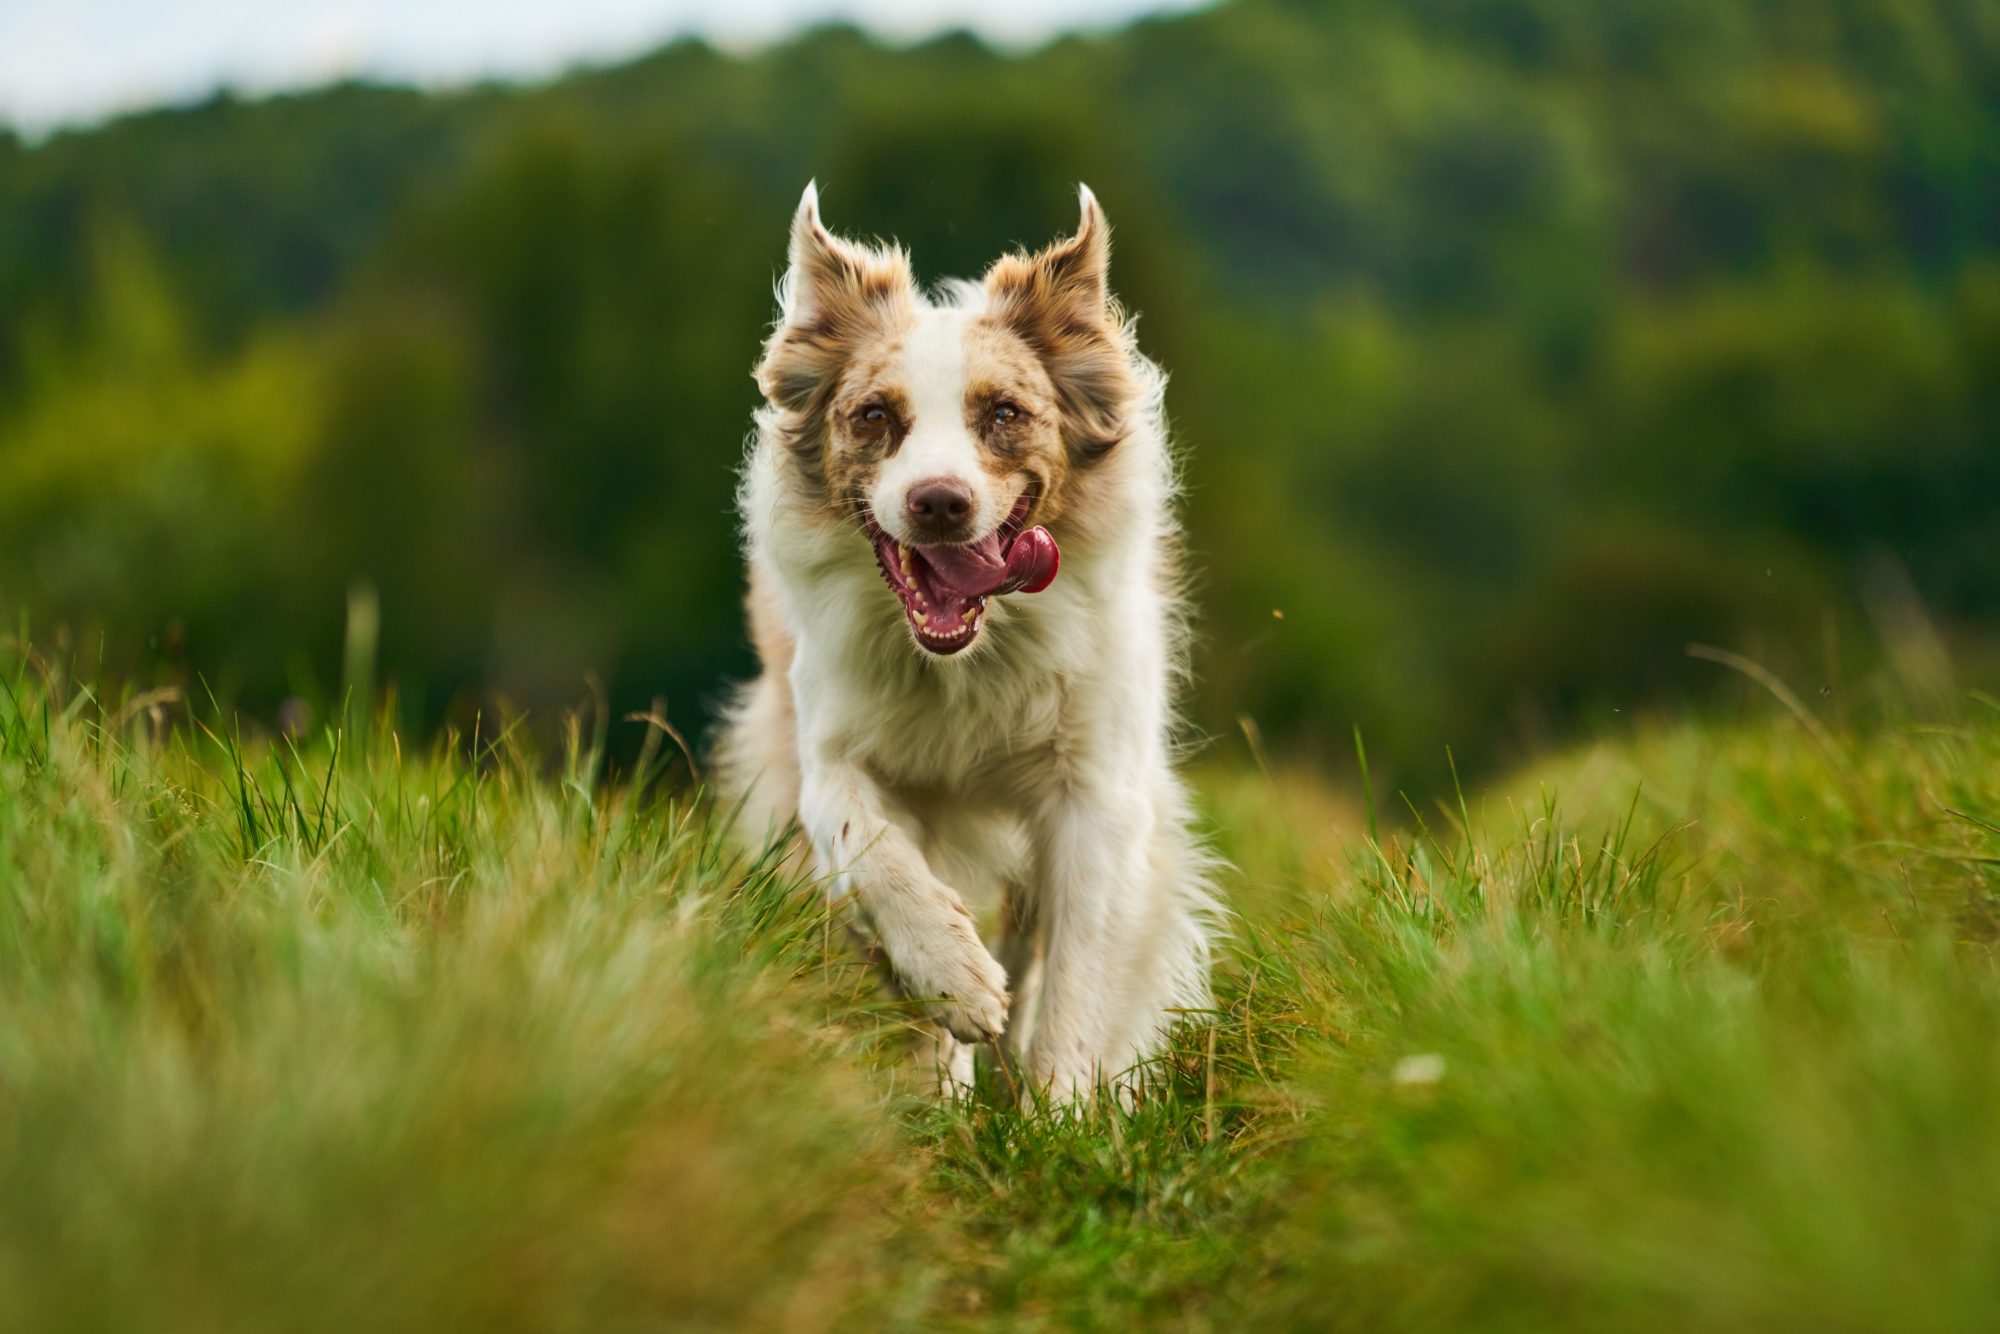 An Australian Shepherd running with his tongue out.